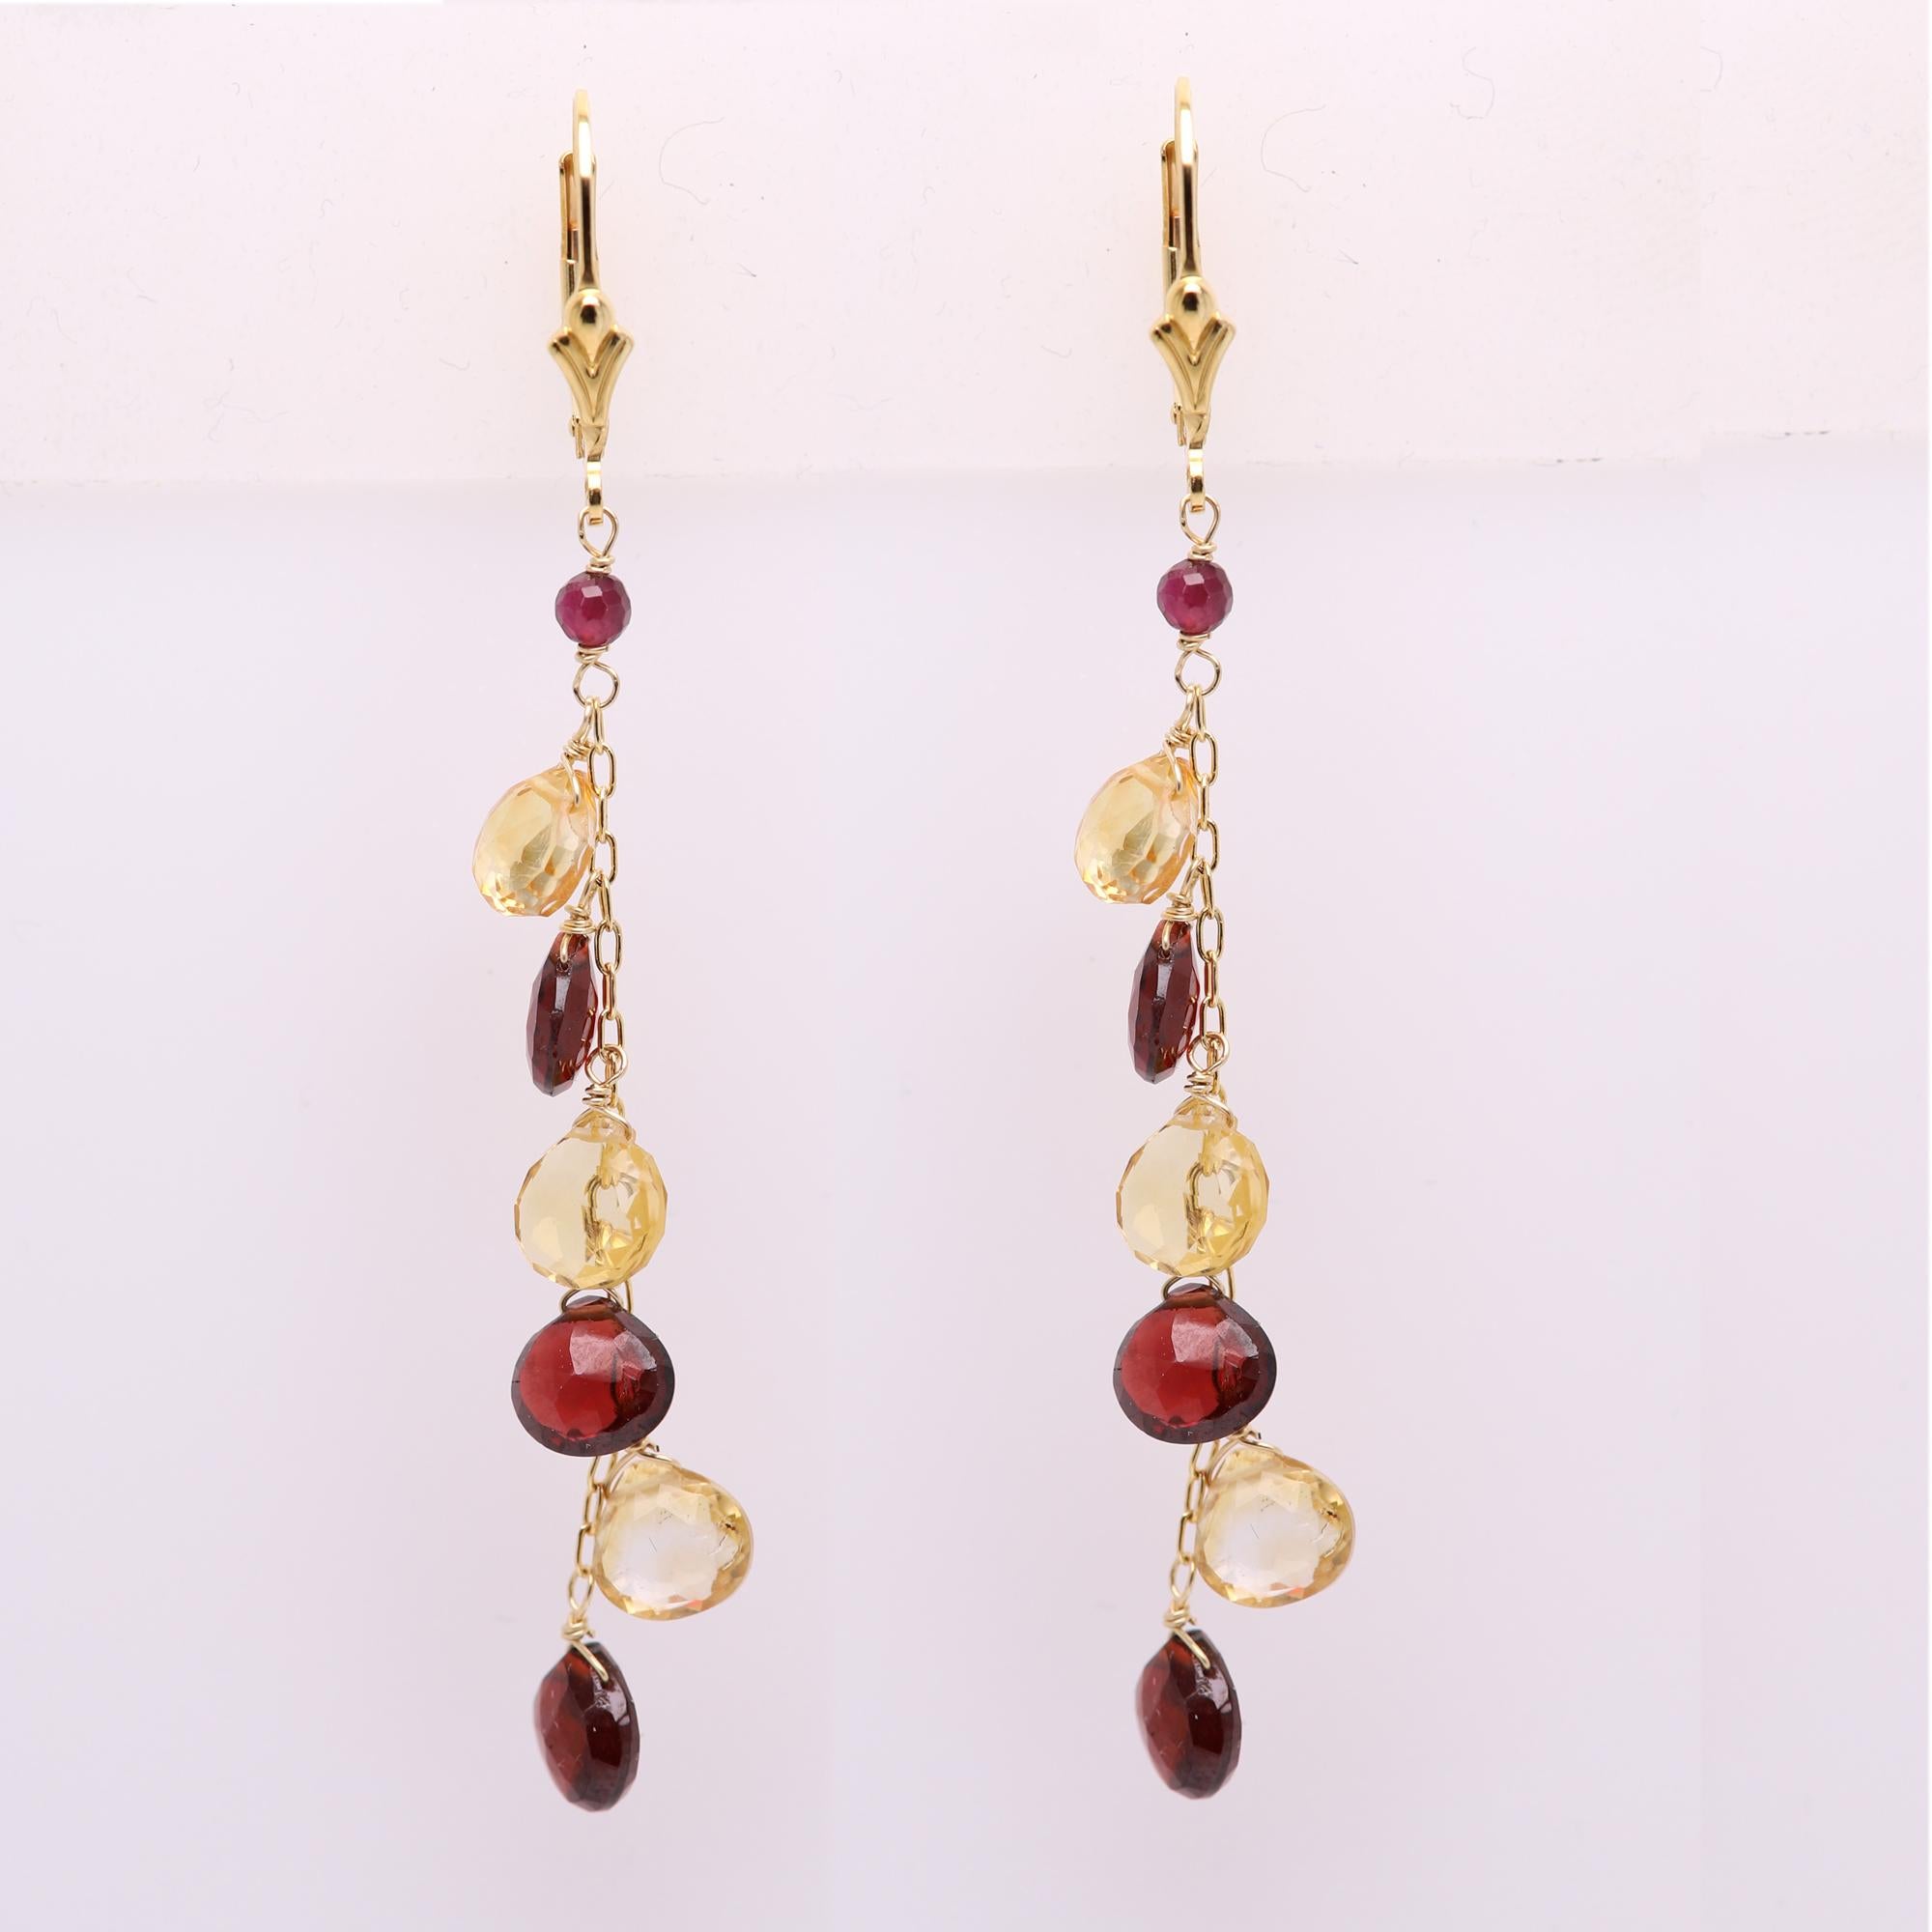 Dangling Earrings Multi Color Semi Precious Gems 14 Karat Yellow Gold In New Condition For Sale In Brooklyn, NY